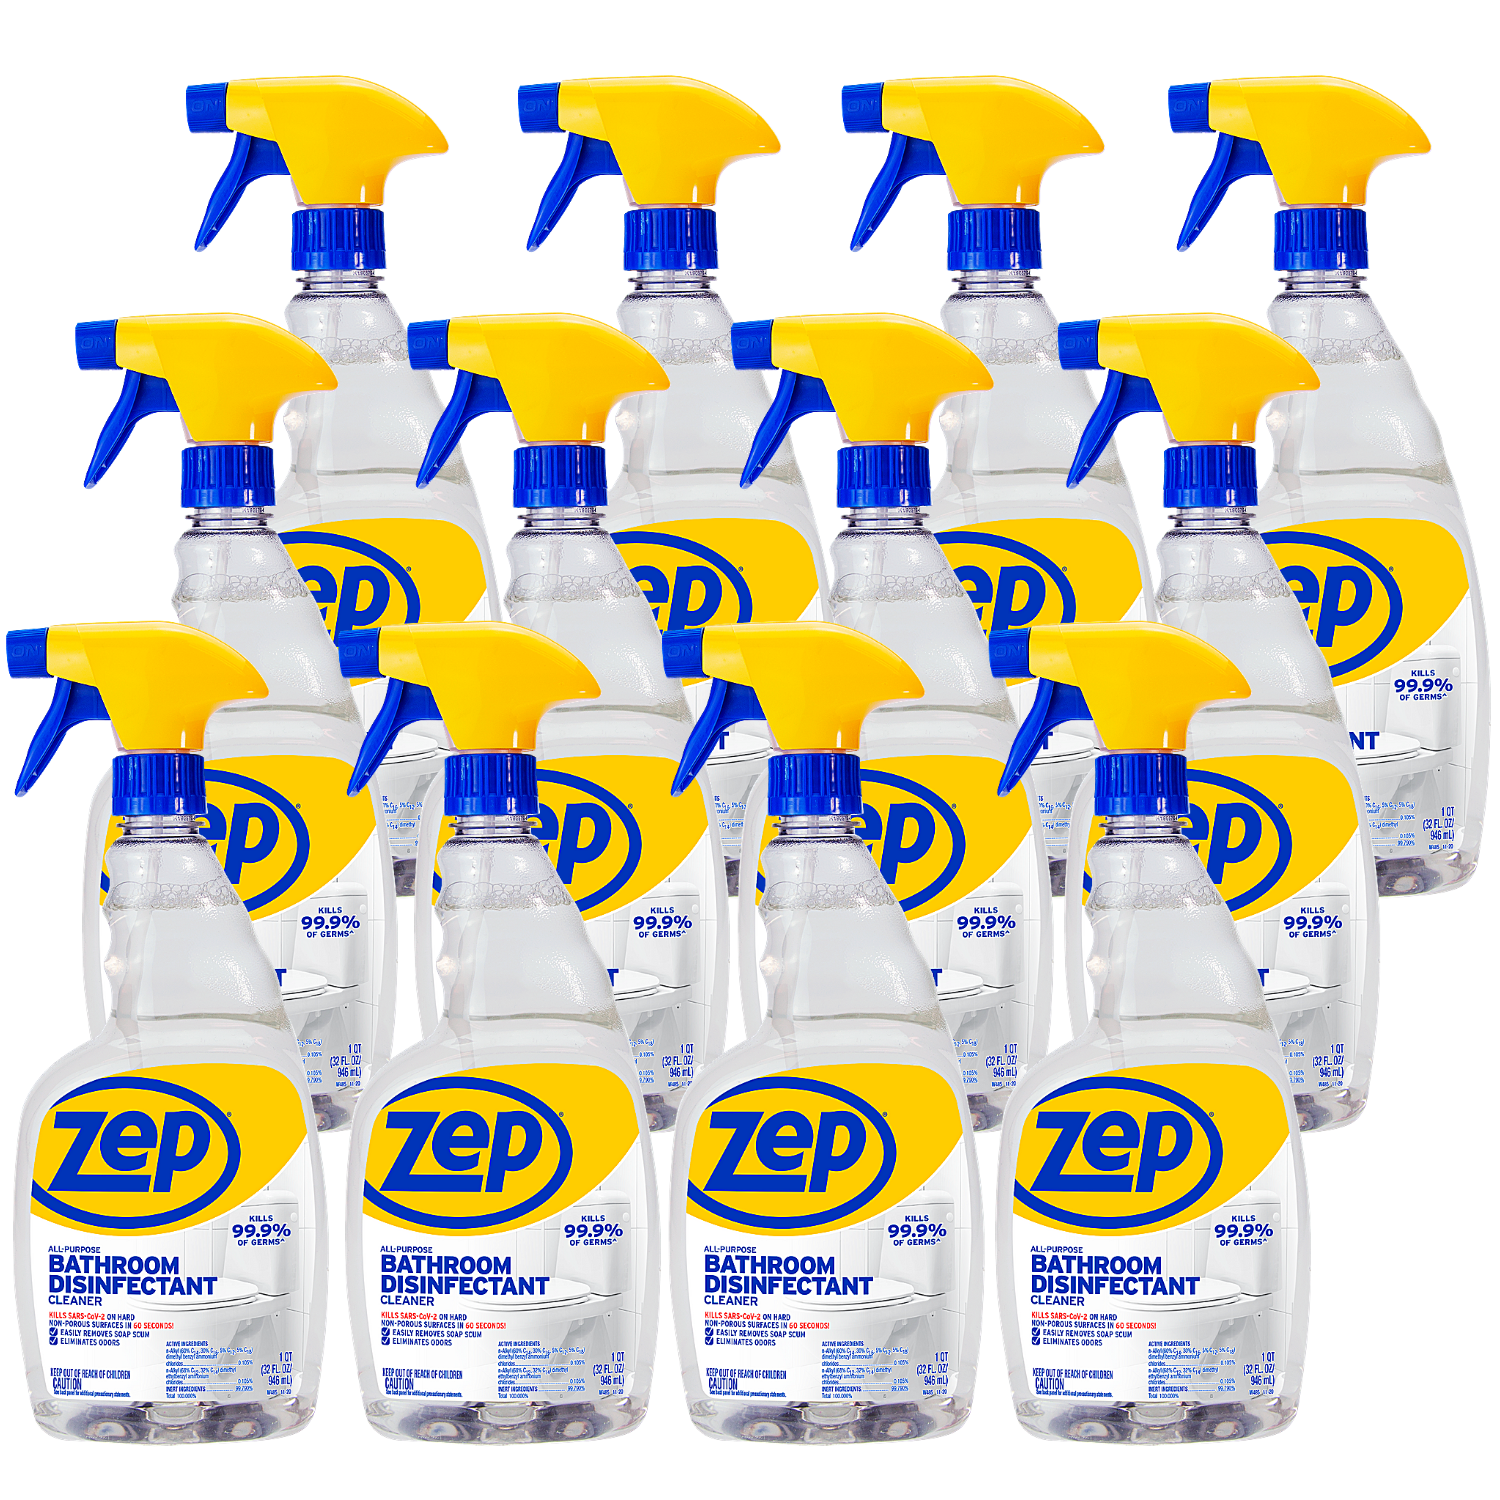 Zep Shower Tub and Tile Cleaner 32 Ounce (Case of 4)